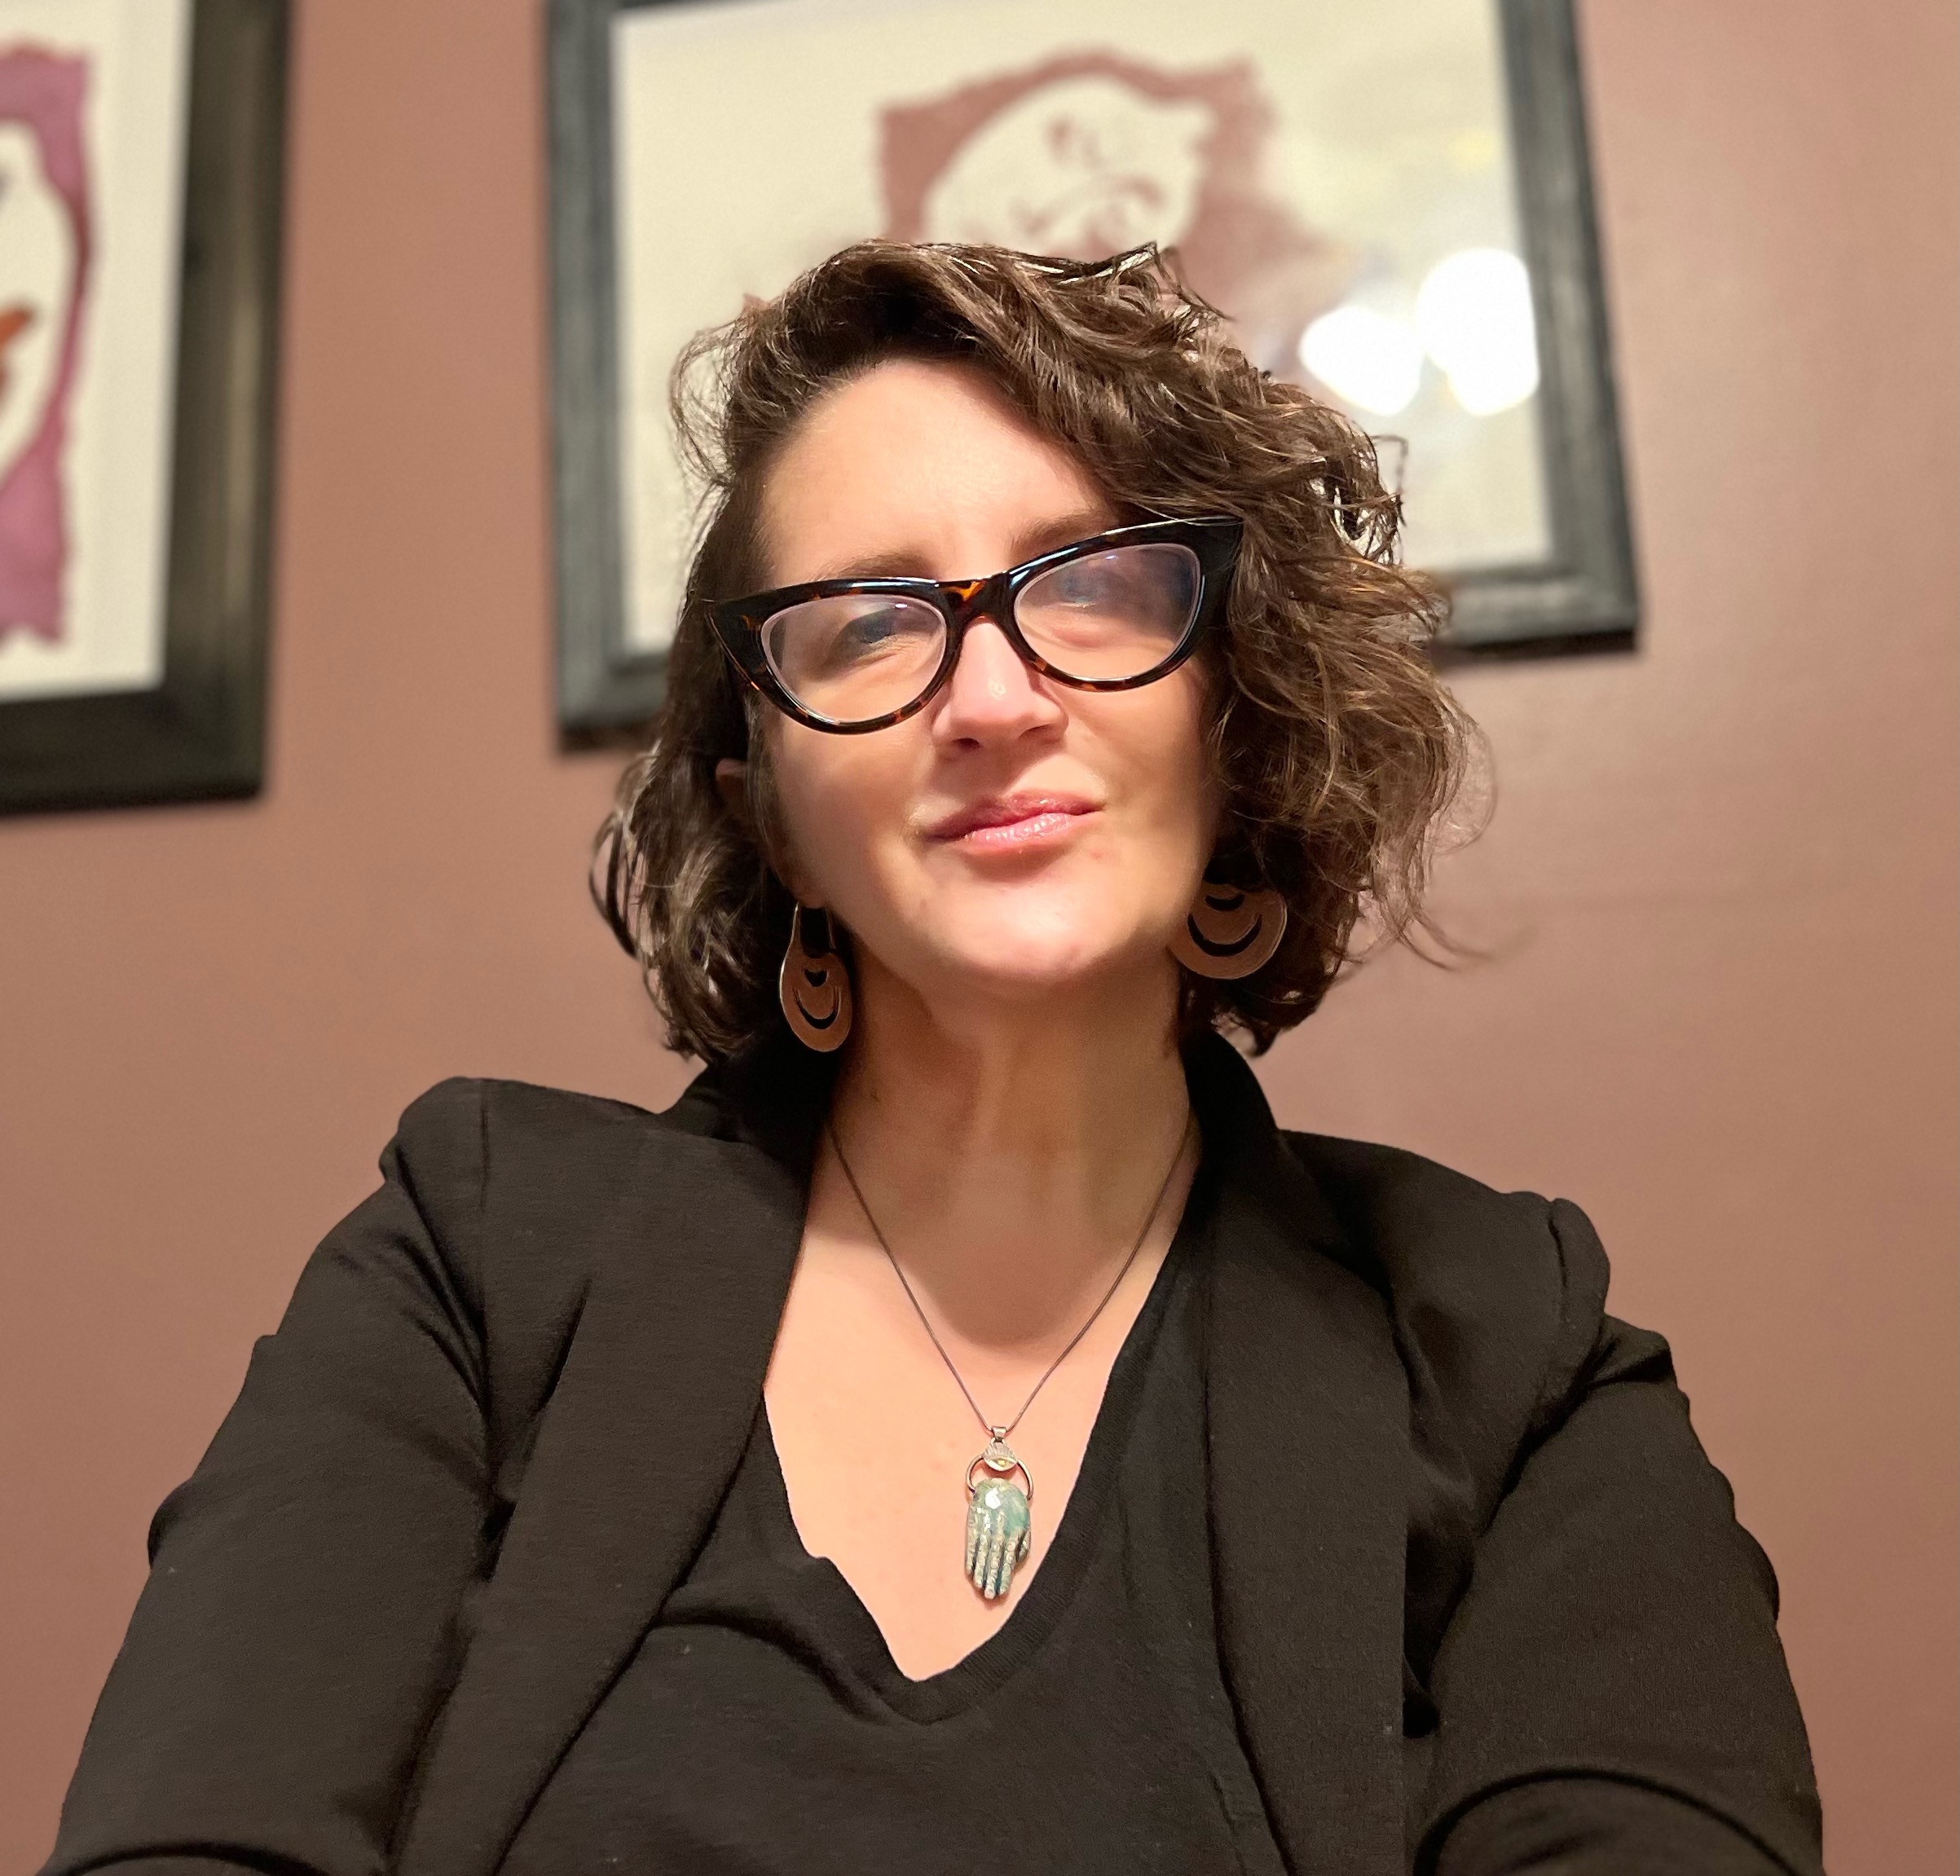 Image of Dr. Alaina Brenick in a black top and black blazer with tortoise shell glasses in a cat eye shape. She is wearing a light blue batique Hamsa necklace. She has short brown wavy hair, slightly shaved on the right side. 